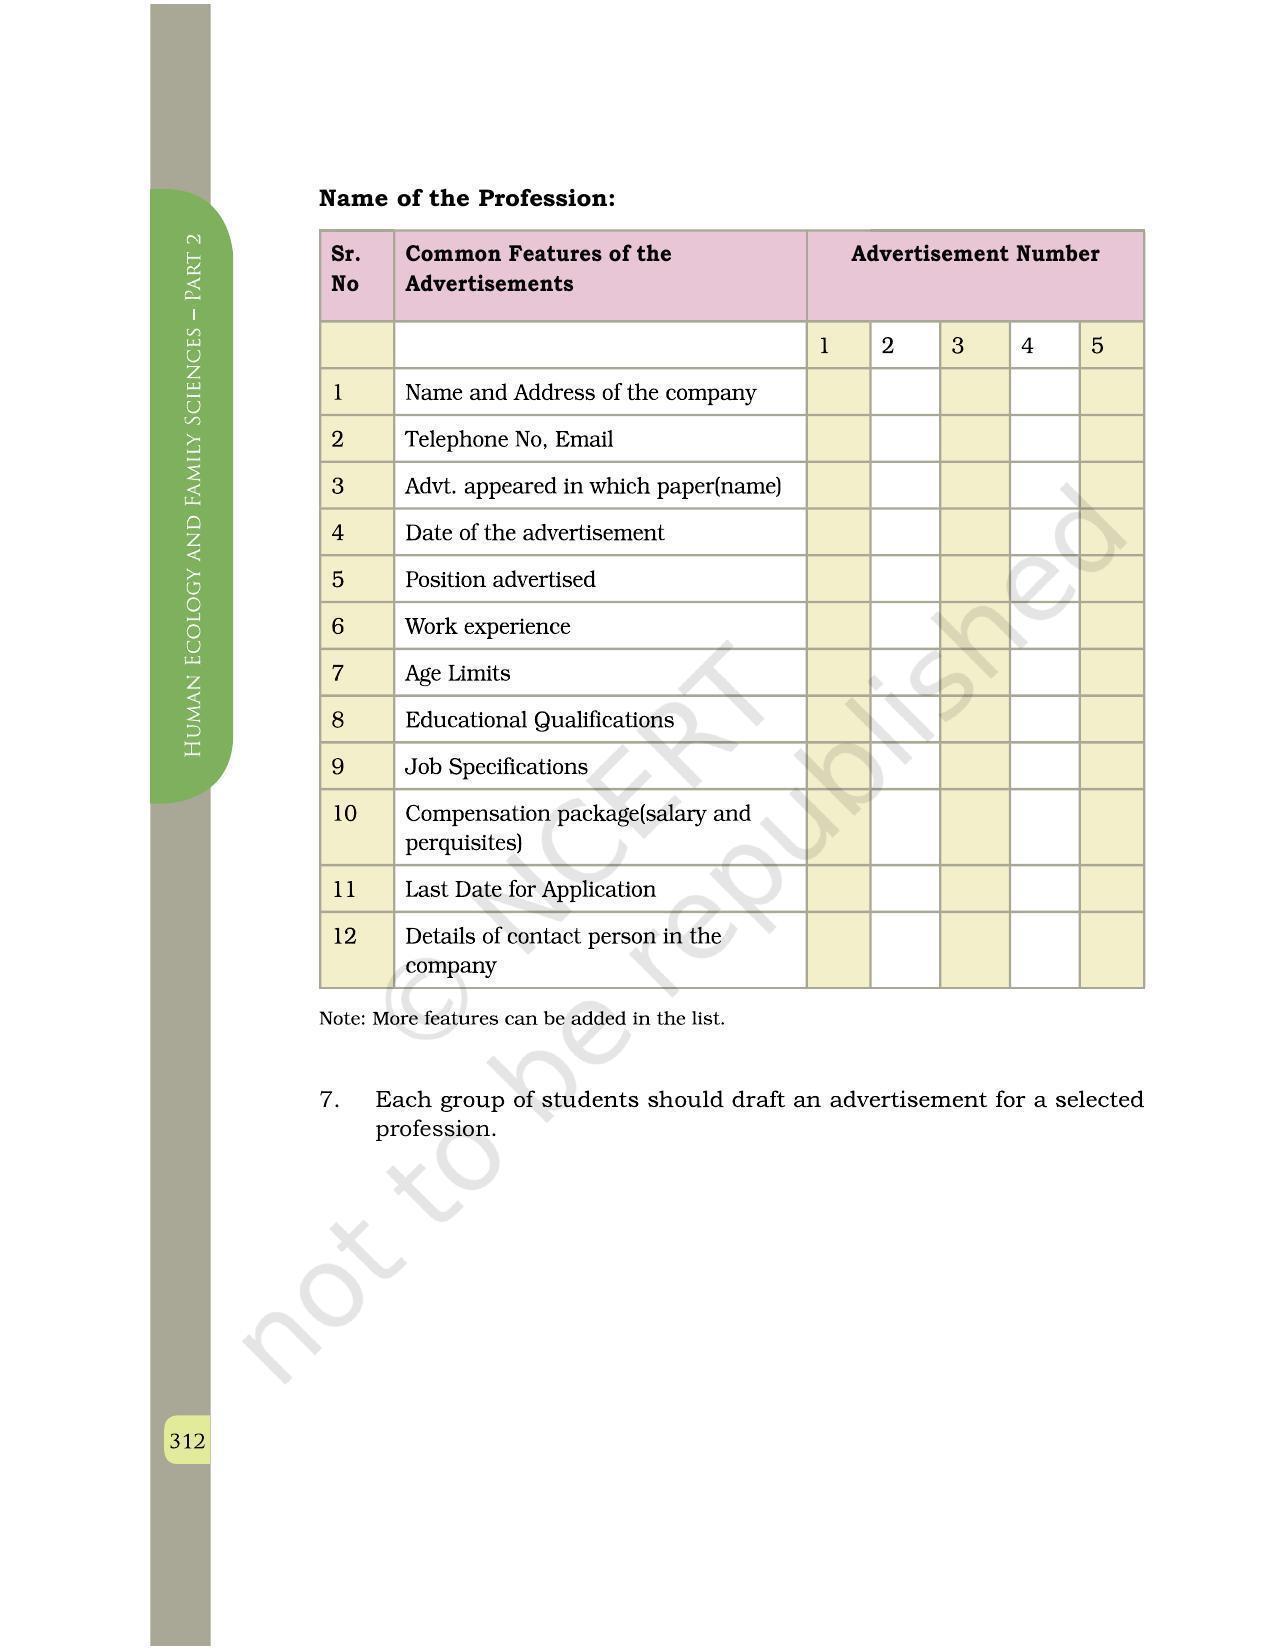 NCERT Book for Class 12 Home Science (Part -II) Chapter 16 Human Resource Management - Page 18